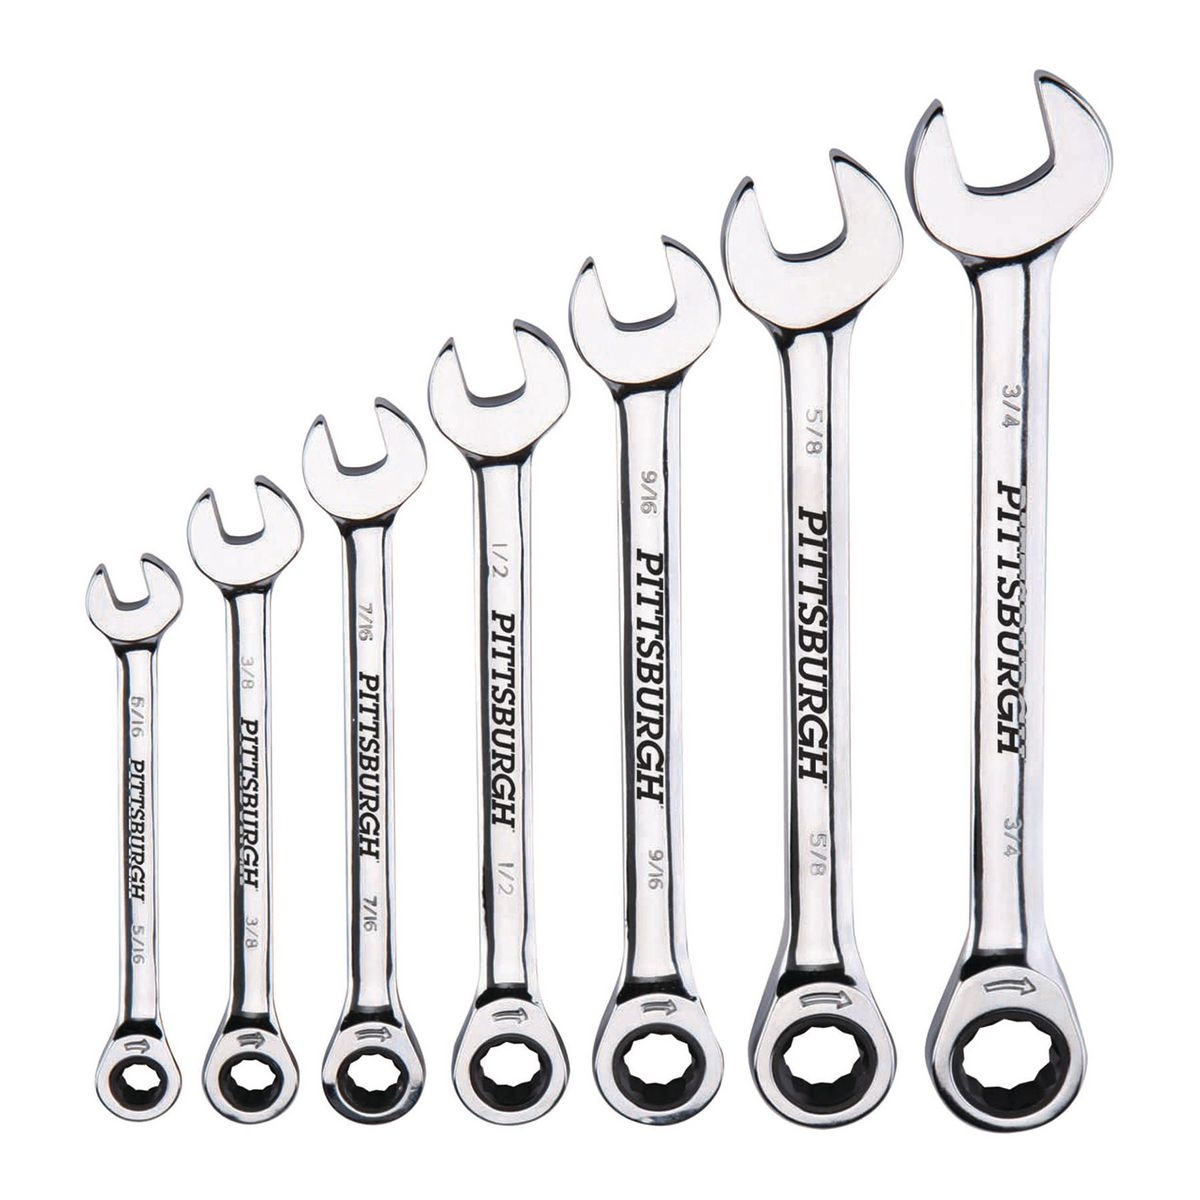 PITTSBURGH SAE Combination Ratcheting Wrench Set 7 Pc. - Item 96654 / 61396 / 62571